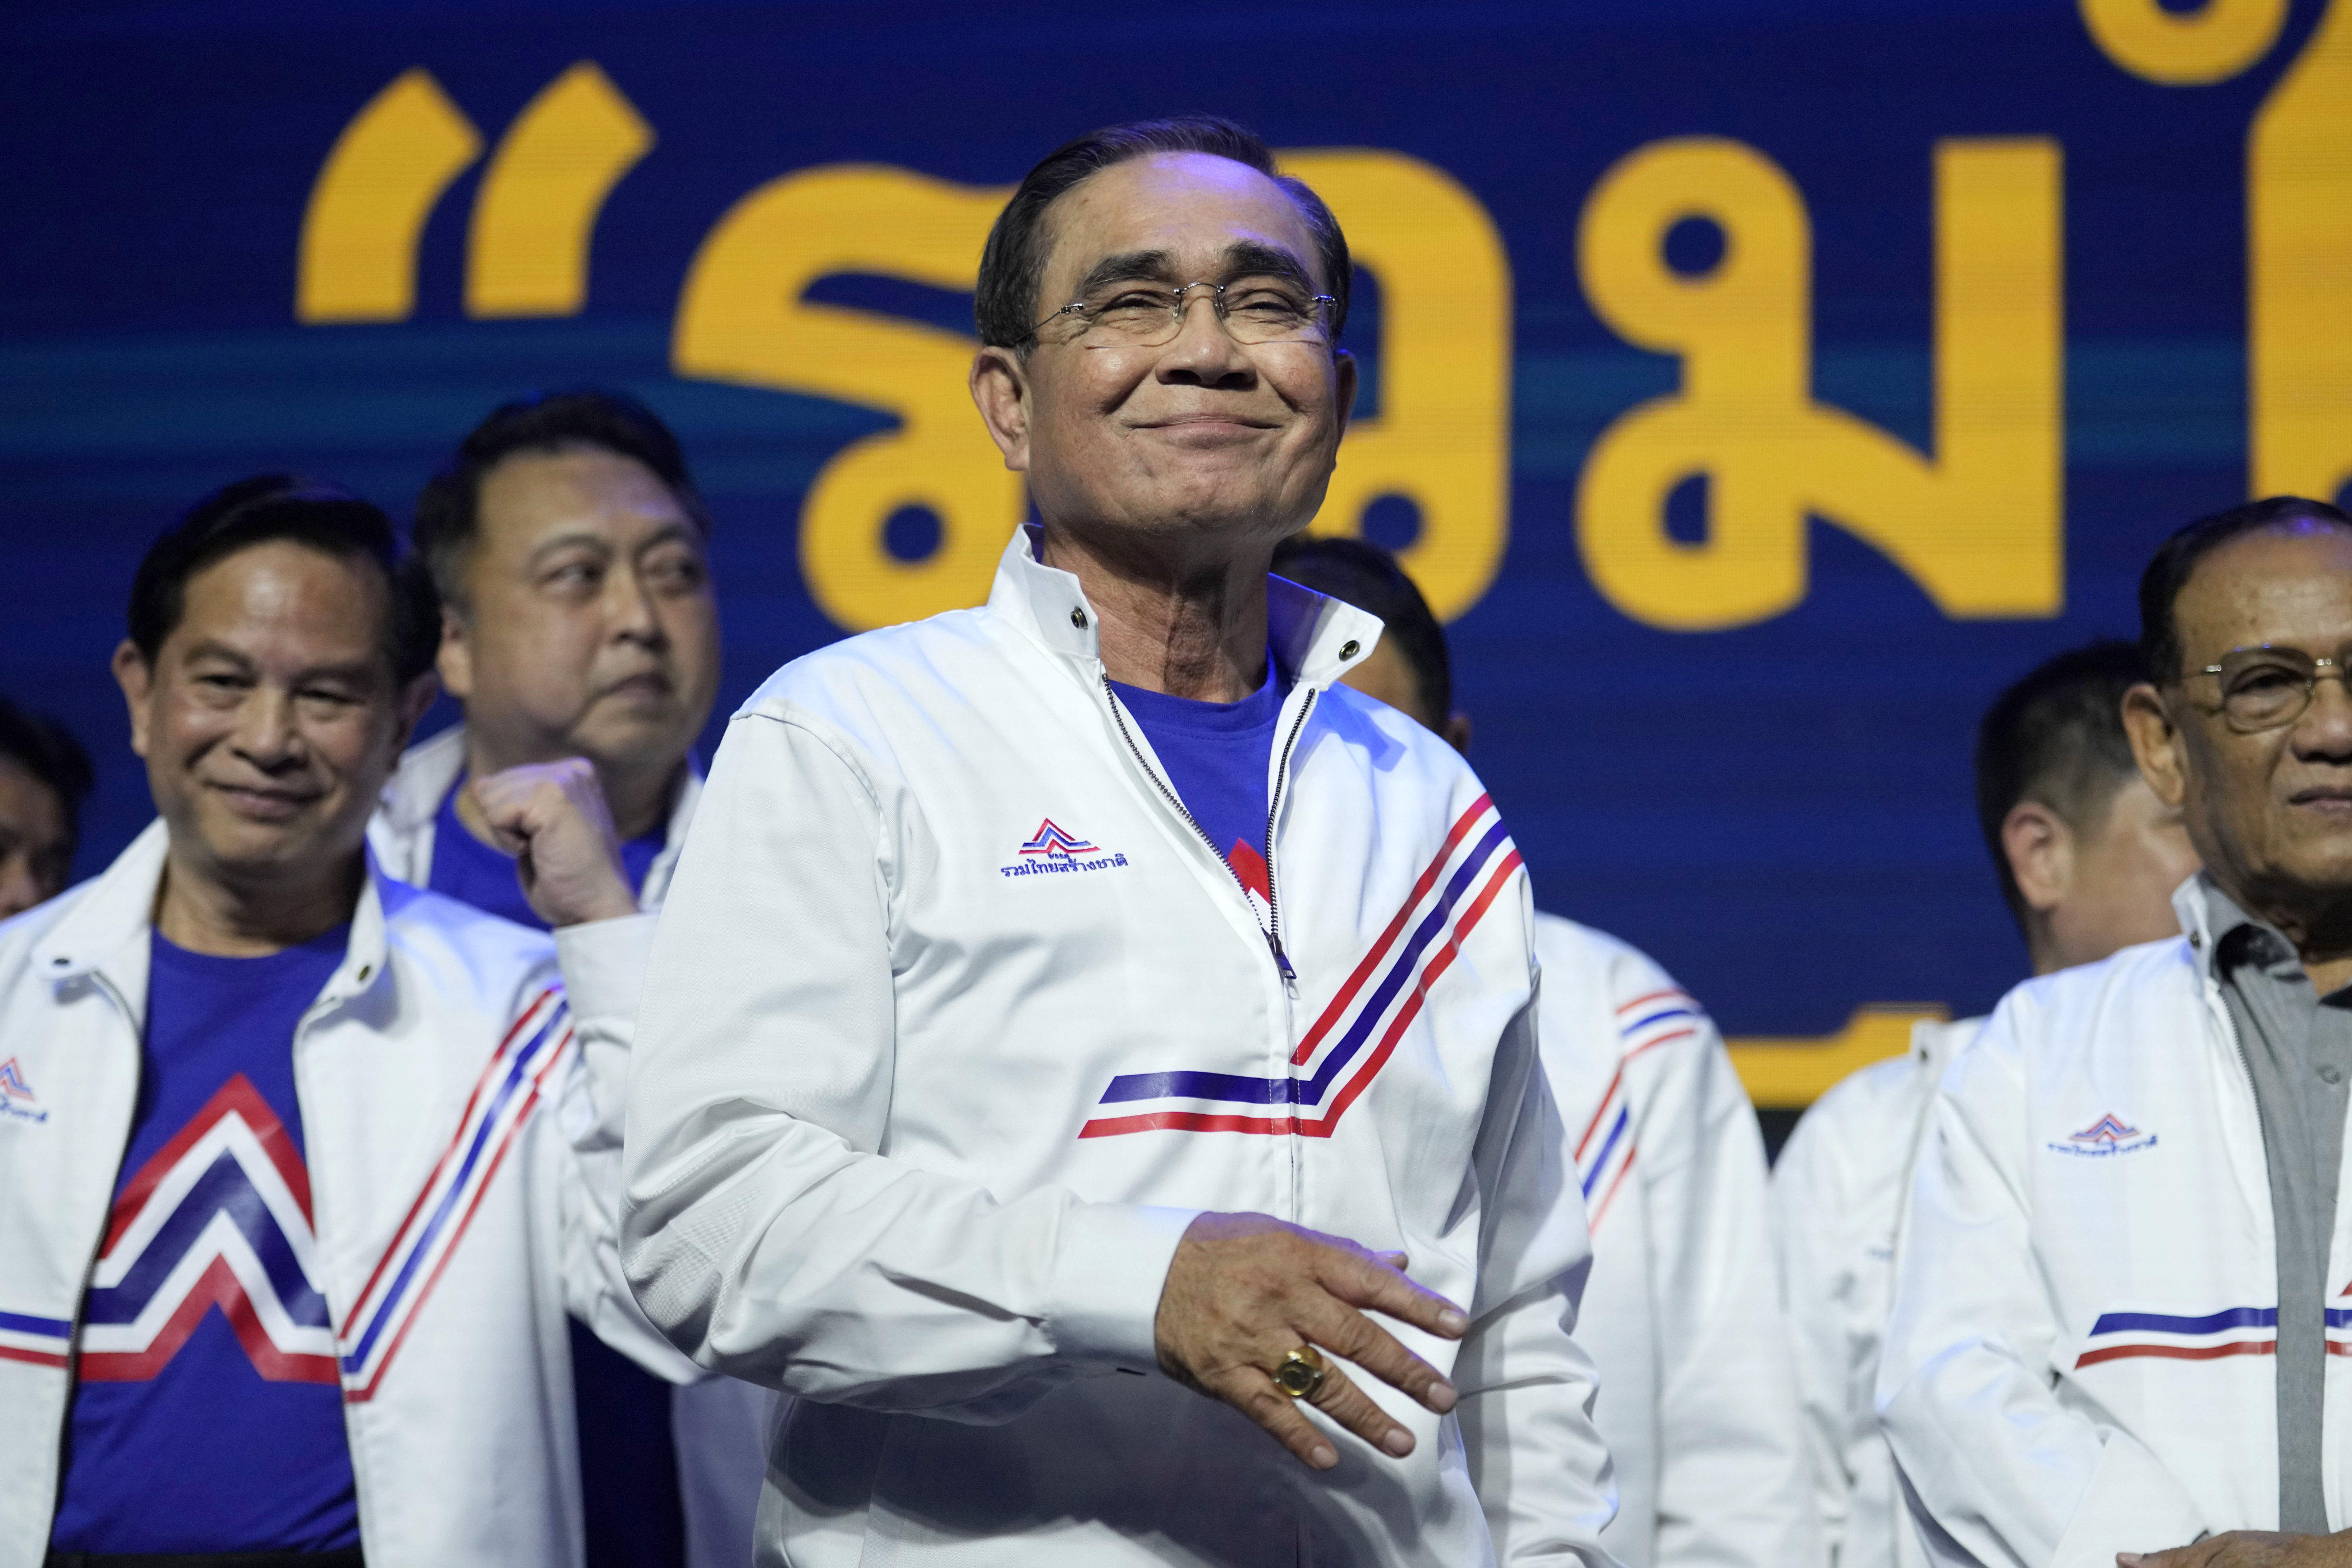 Thai Prime Minister Prayuth Chan-ocha at the official announcement that he is joining the newly established United Thai Nation Party on Monday in Bangkok. Photo: AP